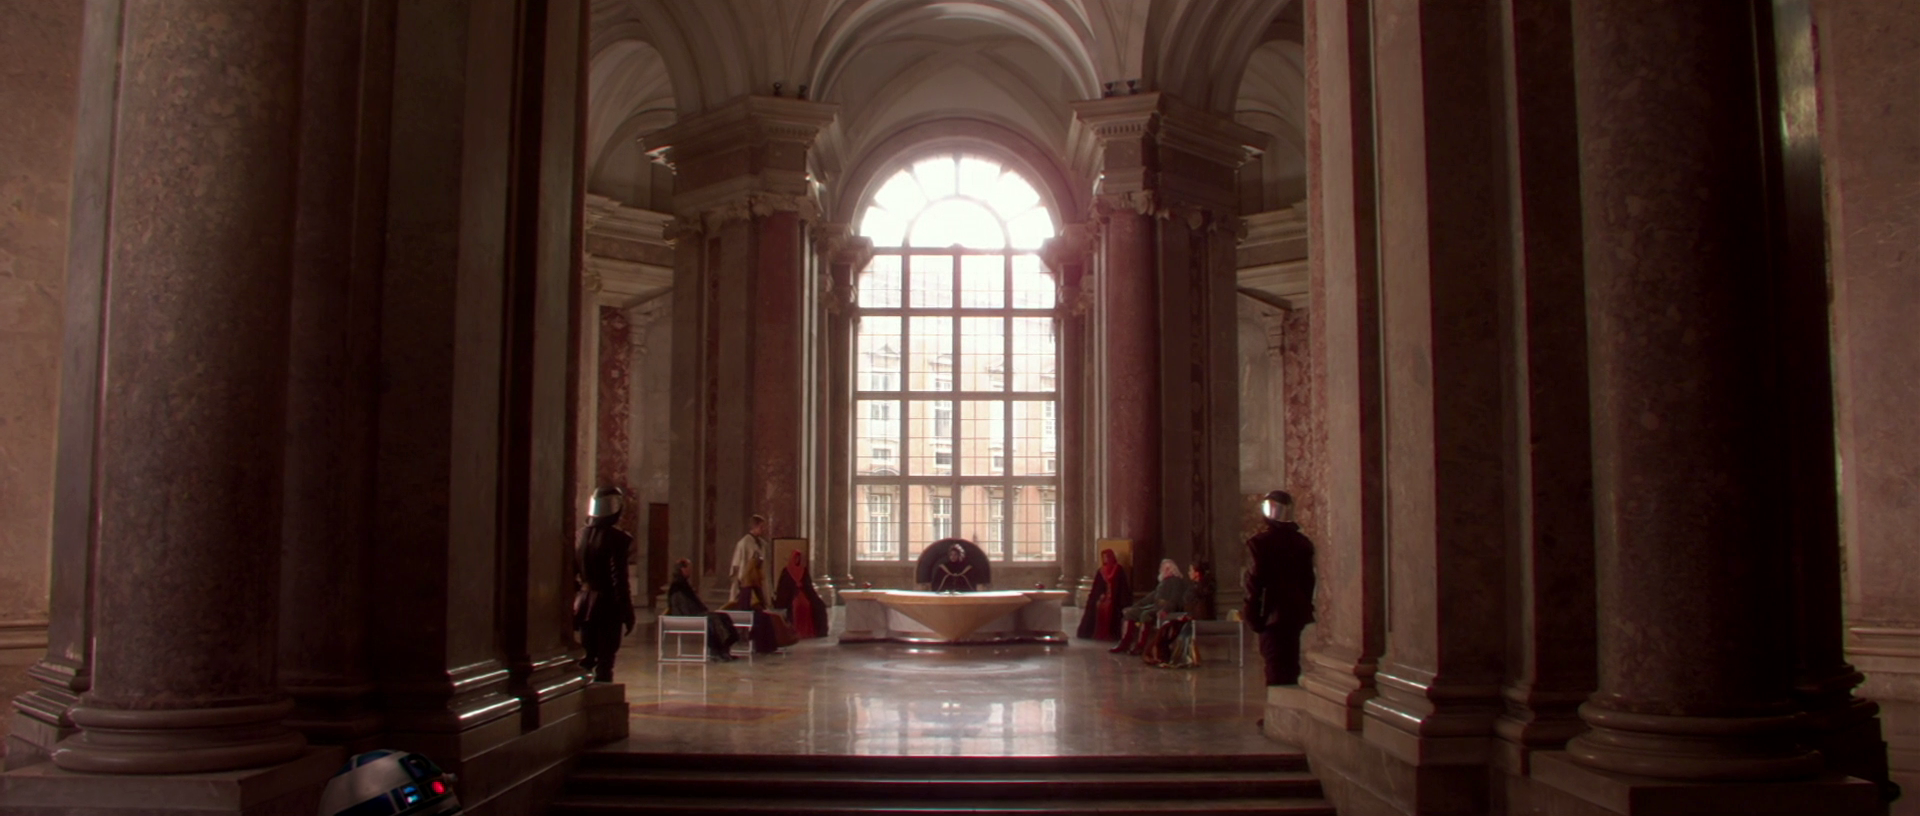 The "Royal Palace of Caserta" in Theed